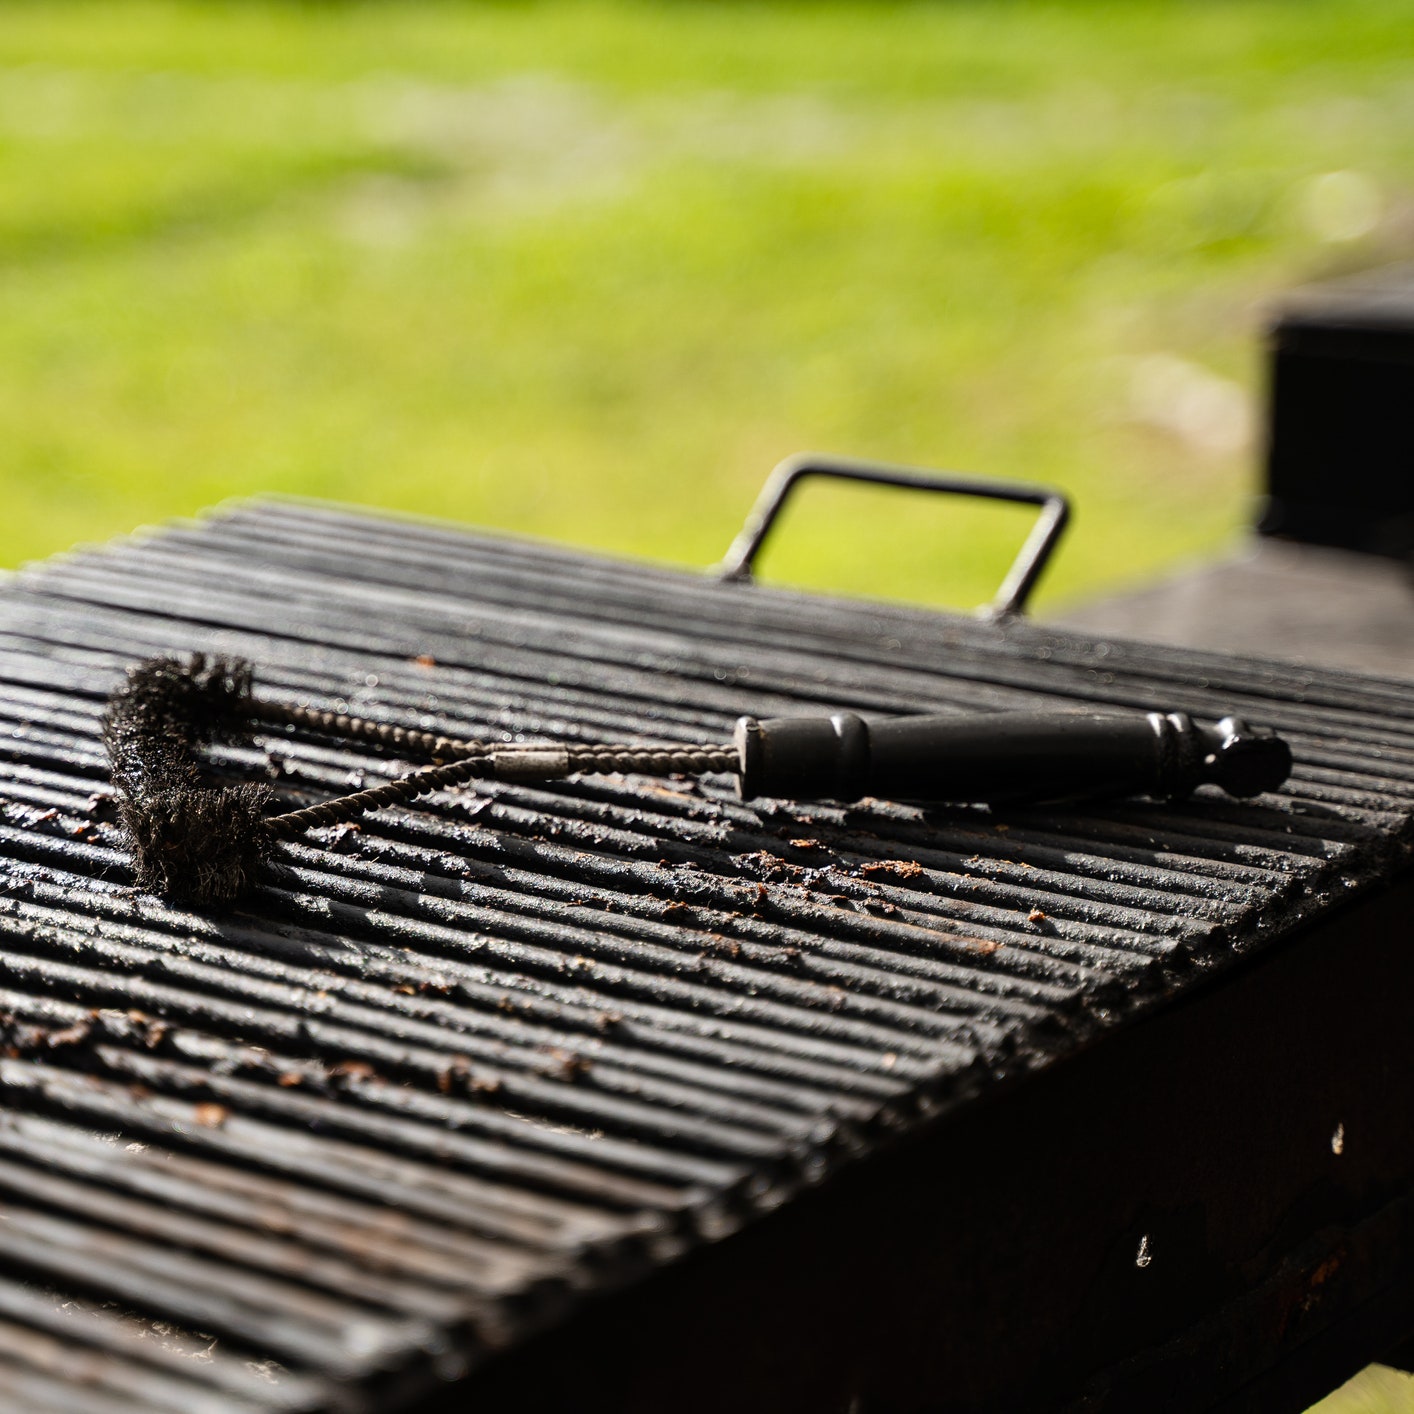 PSA: Using a Wire Brush to Clean Your Grill Comes With a Gnarly Health Risk